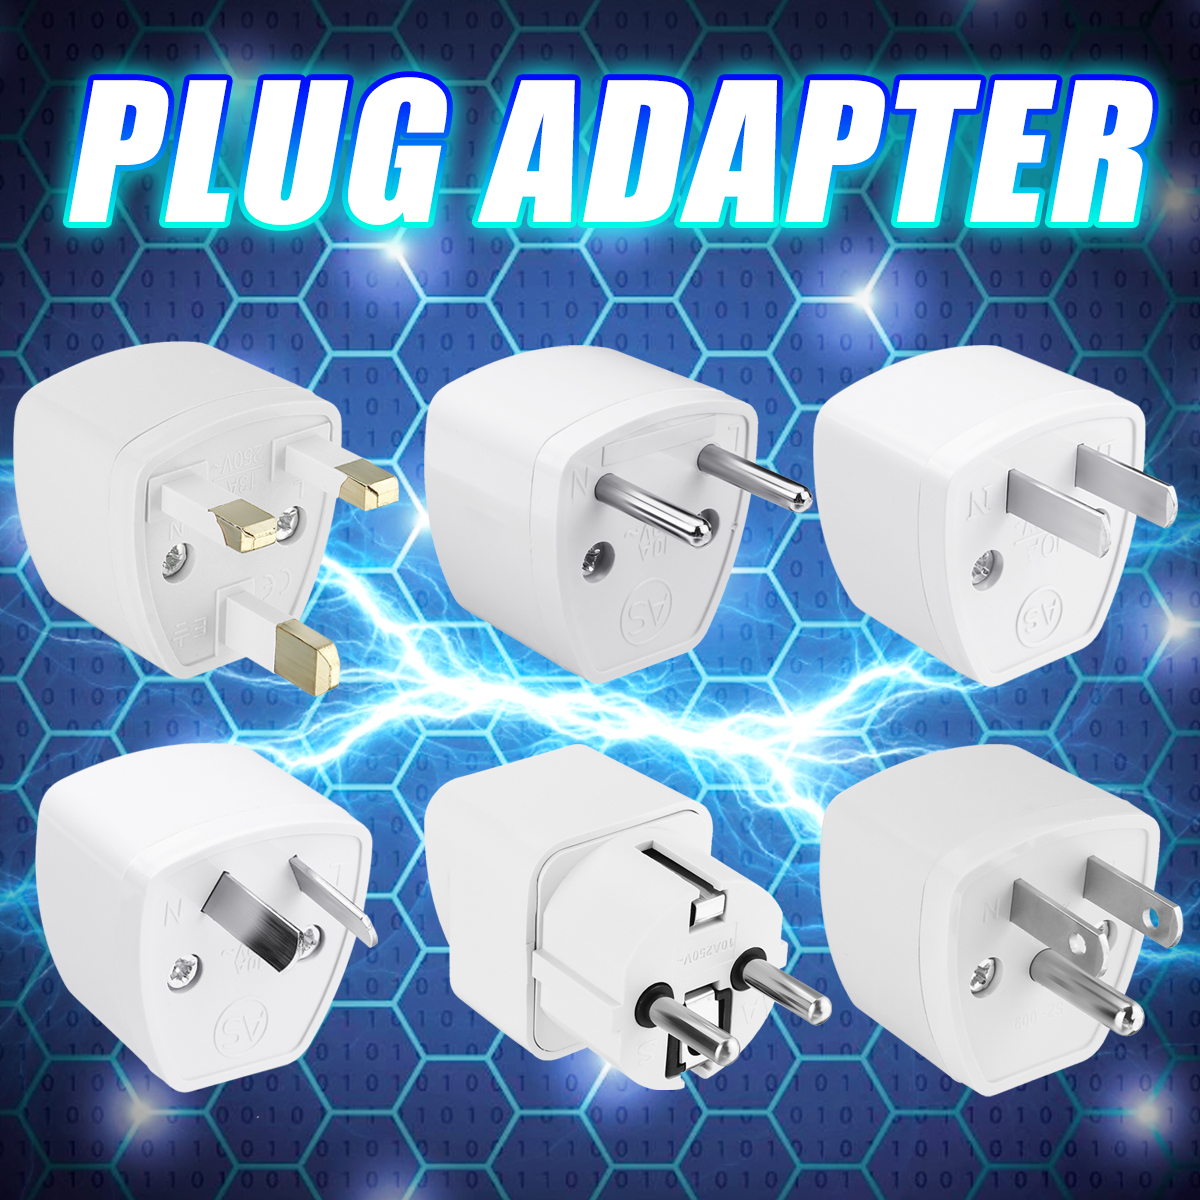 Global-Universal-Adapter-Plug-Adapter-Charger-Travel-Wall-AC-Power-Charger-Outlet-Adapter-Converter-1812356-1